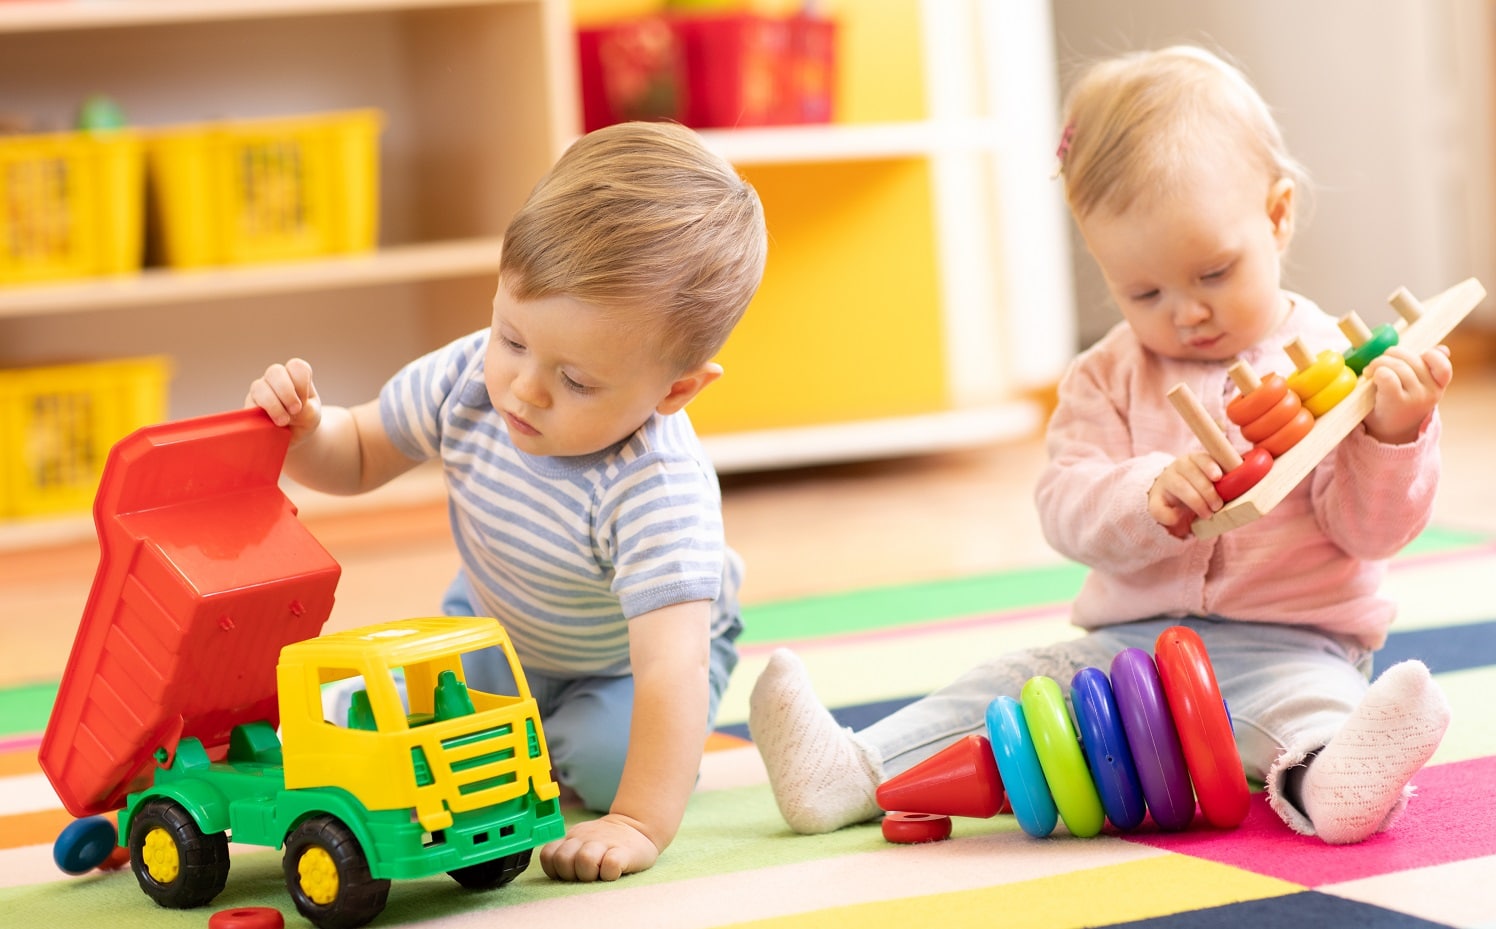 find some games and learning activities for your baby - 35 Indoor Activities for Kids That Will Keep Them Busy